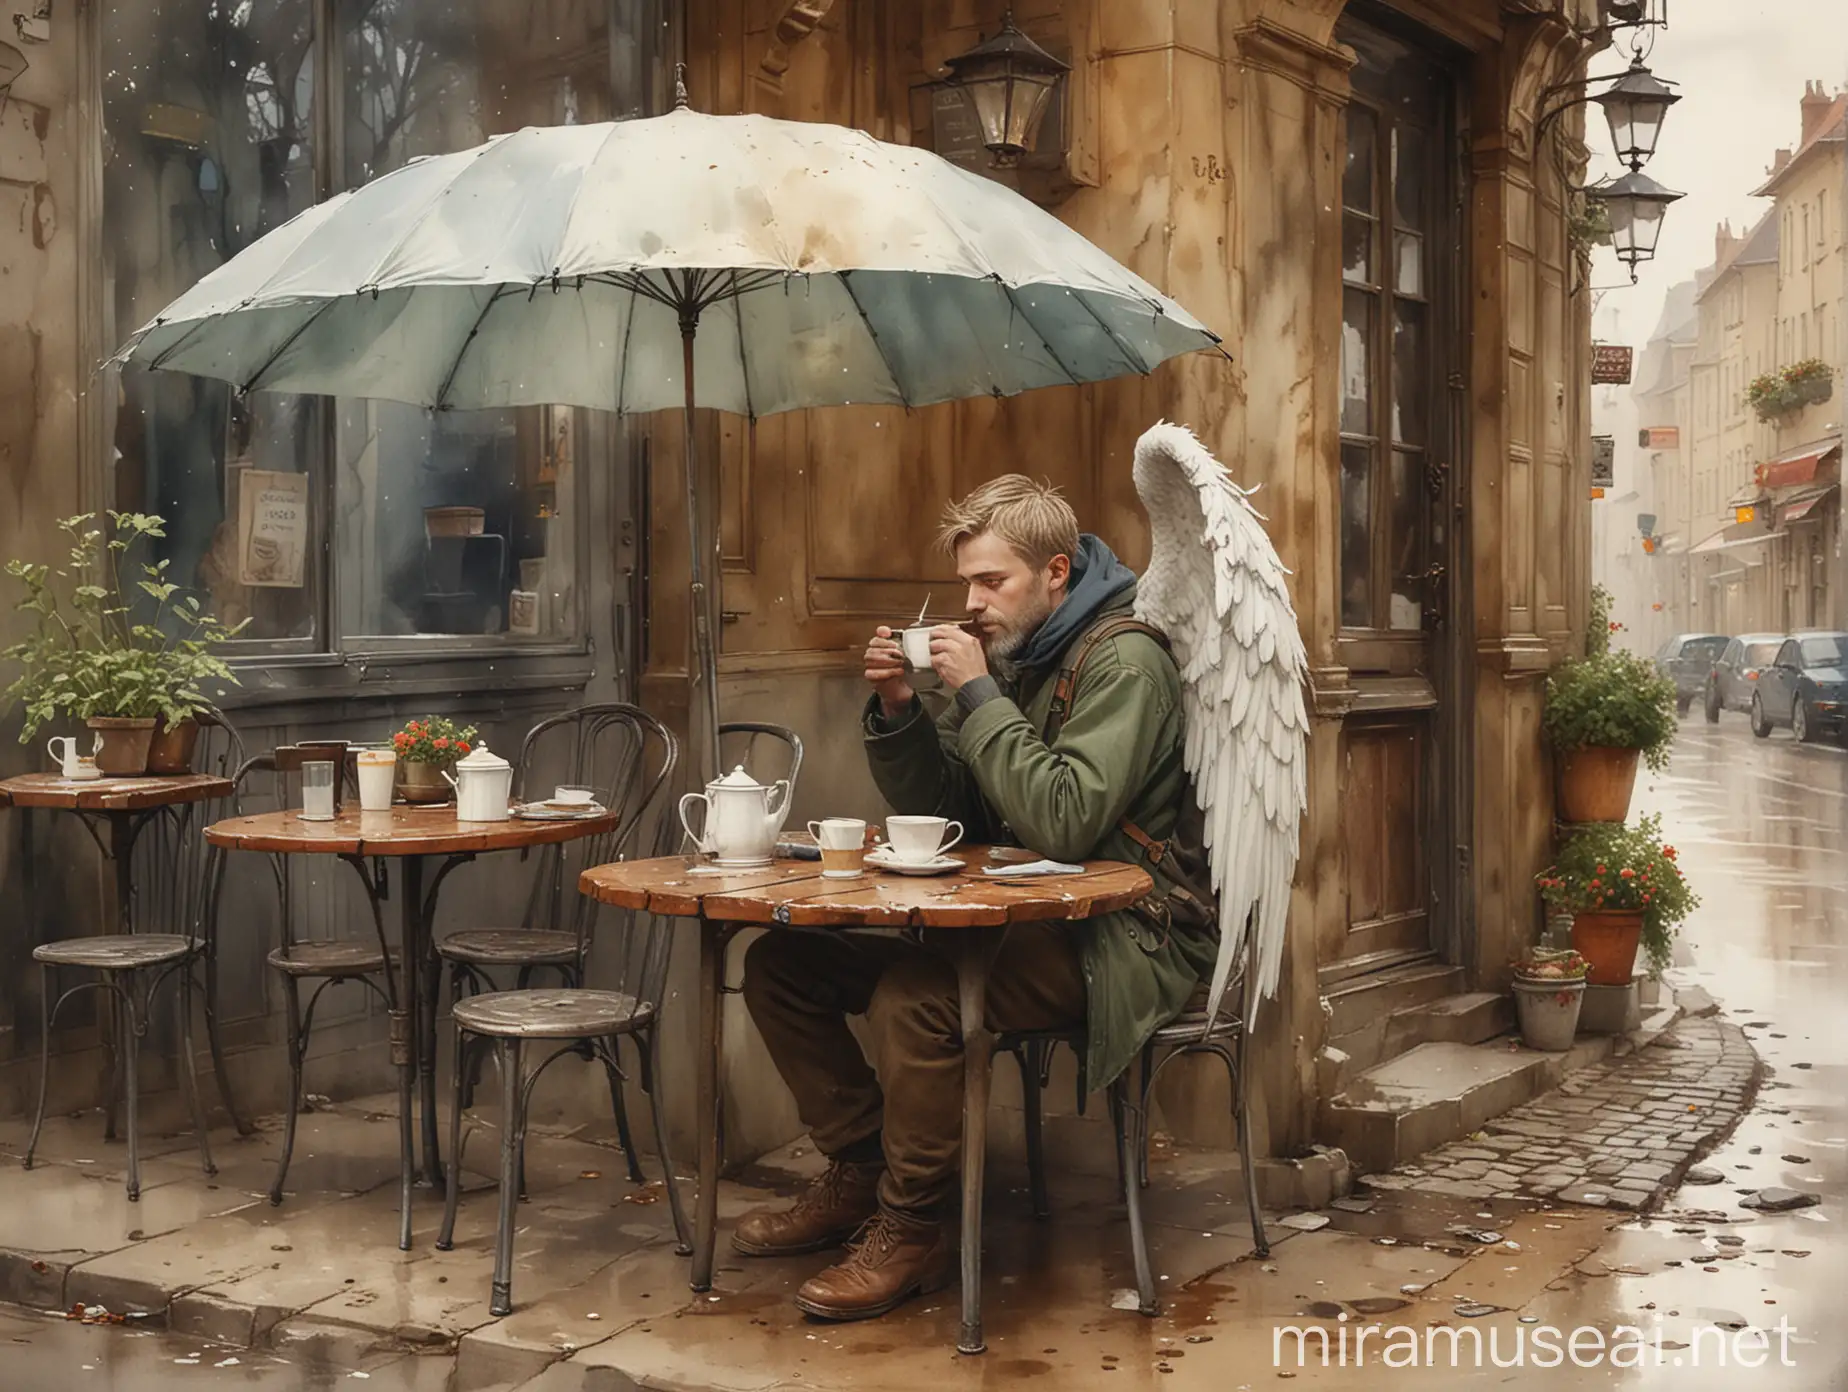 Urban Angel Sipping Tea at Quaint Cafe with Vintage Umbrella